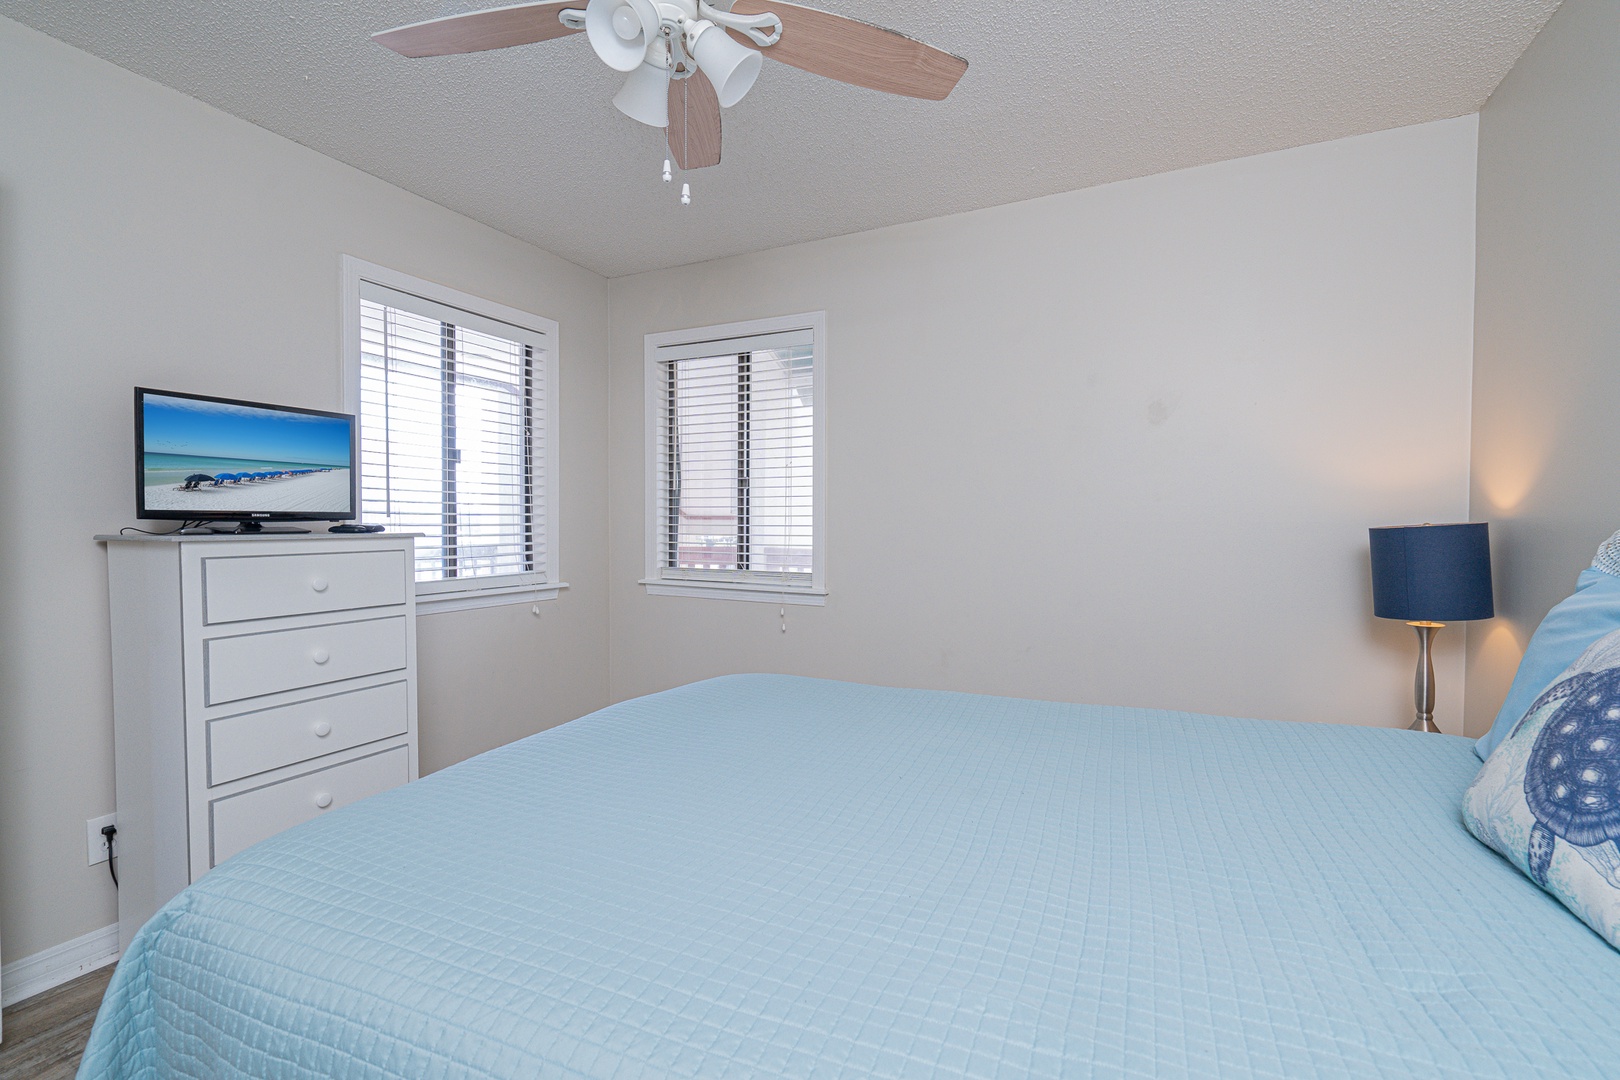 This tranquil lower-level suite features a plush queen bed, ensuite bath, & TV